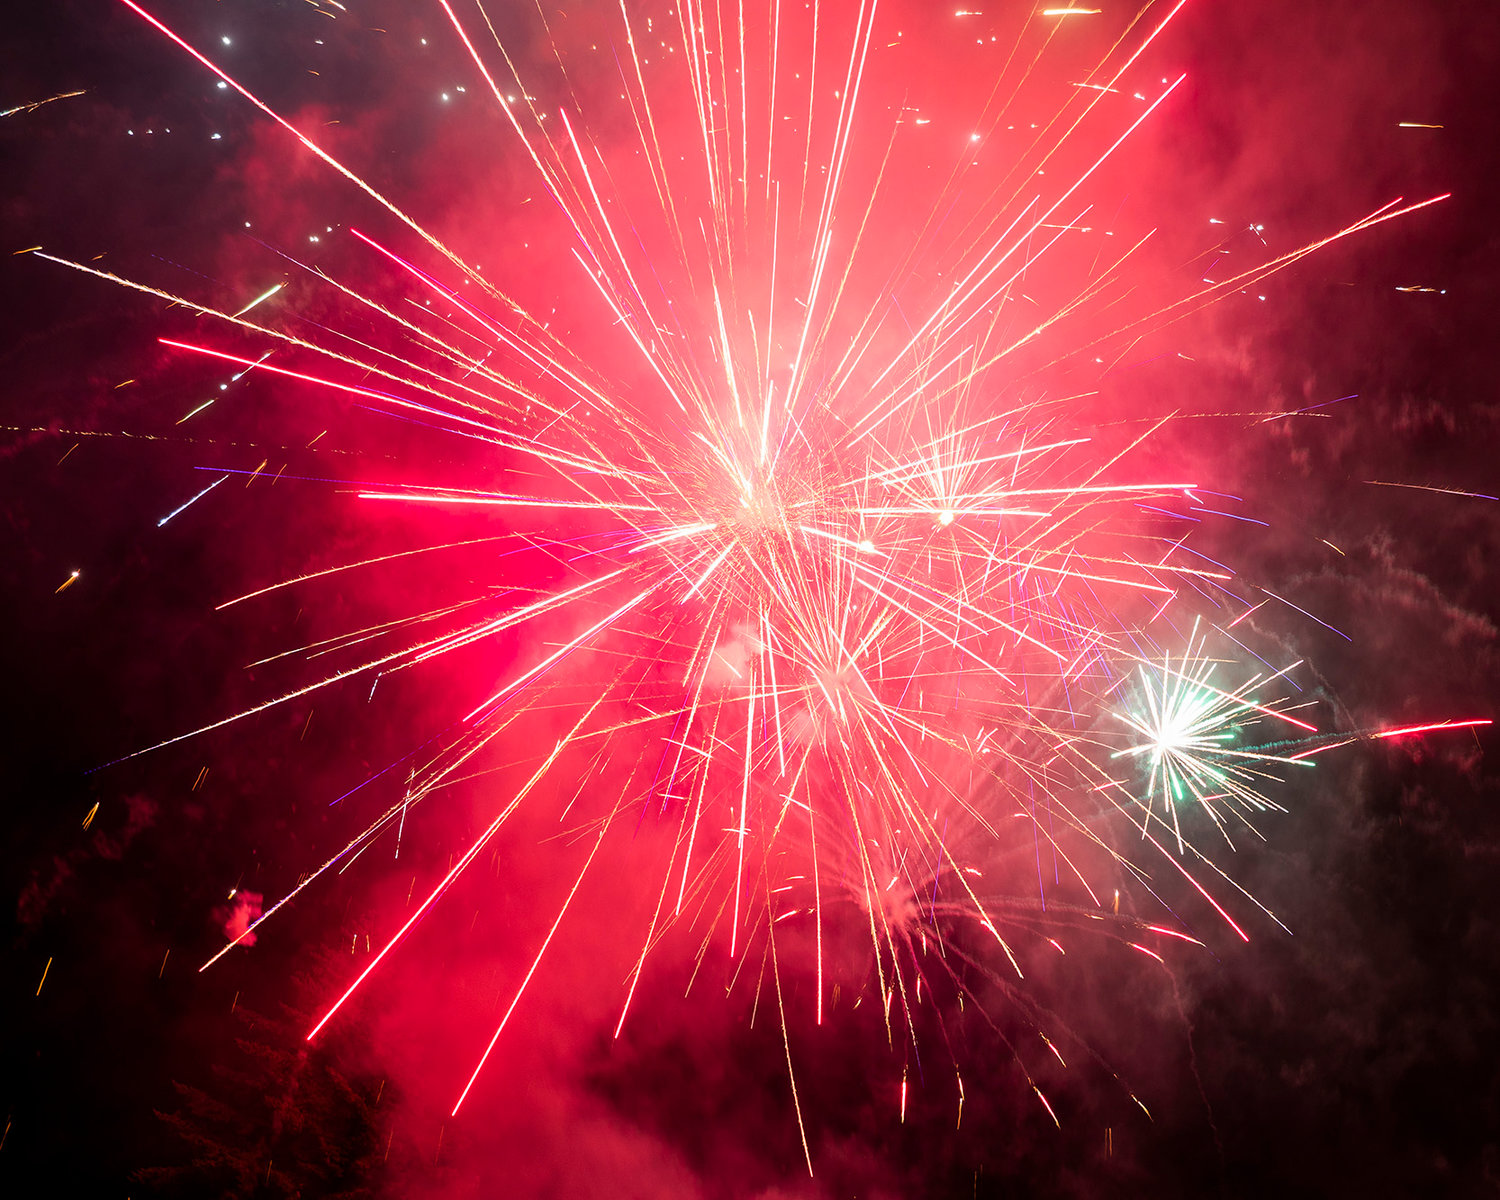 Fireworks explode and illuminate the sky Saturday over Packwood.